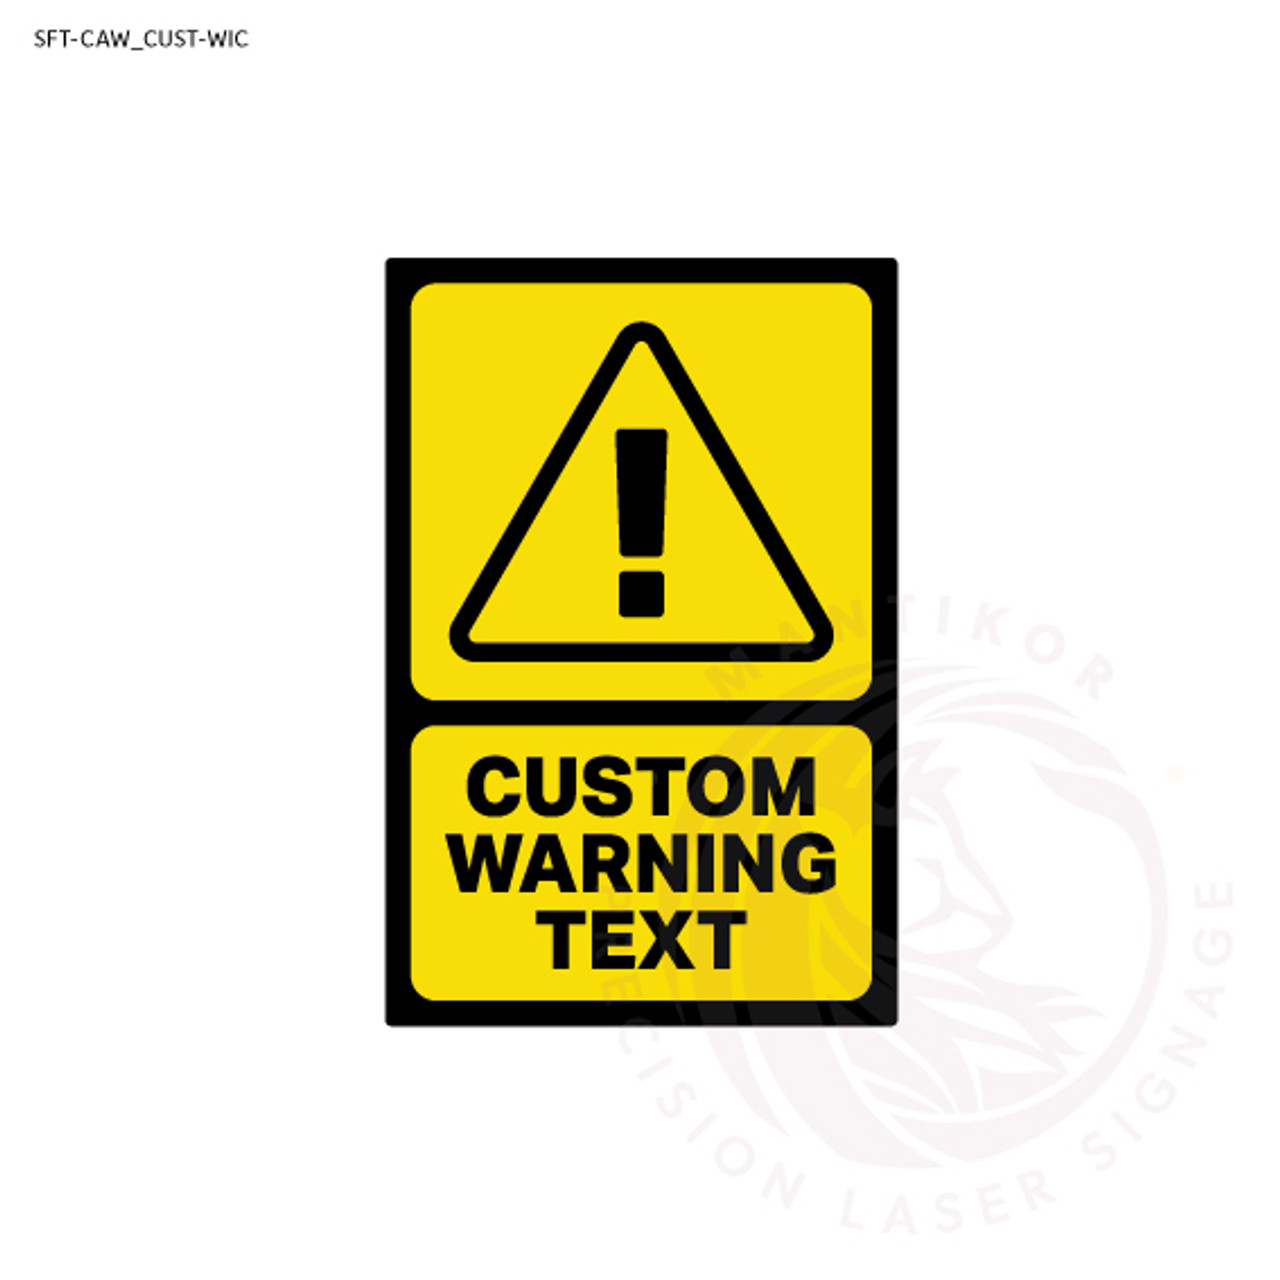 Custom Warning Signage with Icon - Pick your own warning message